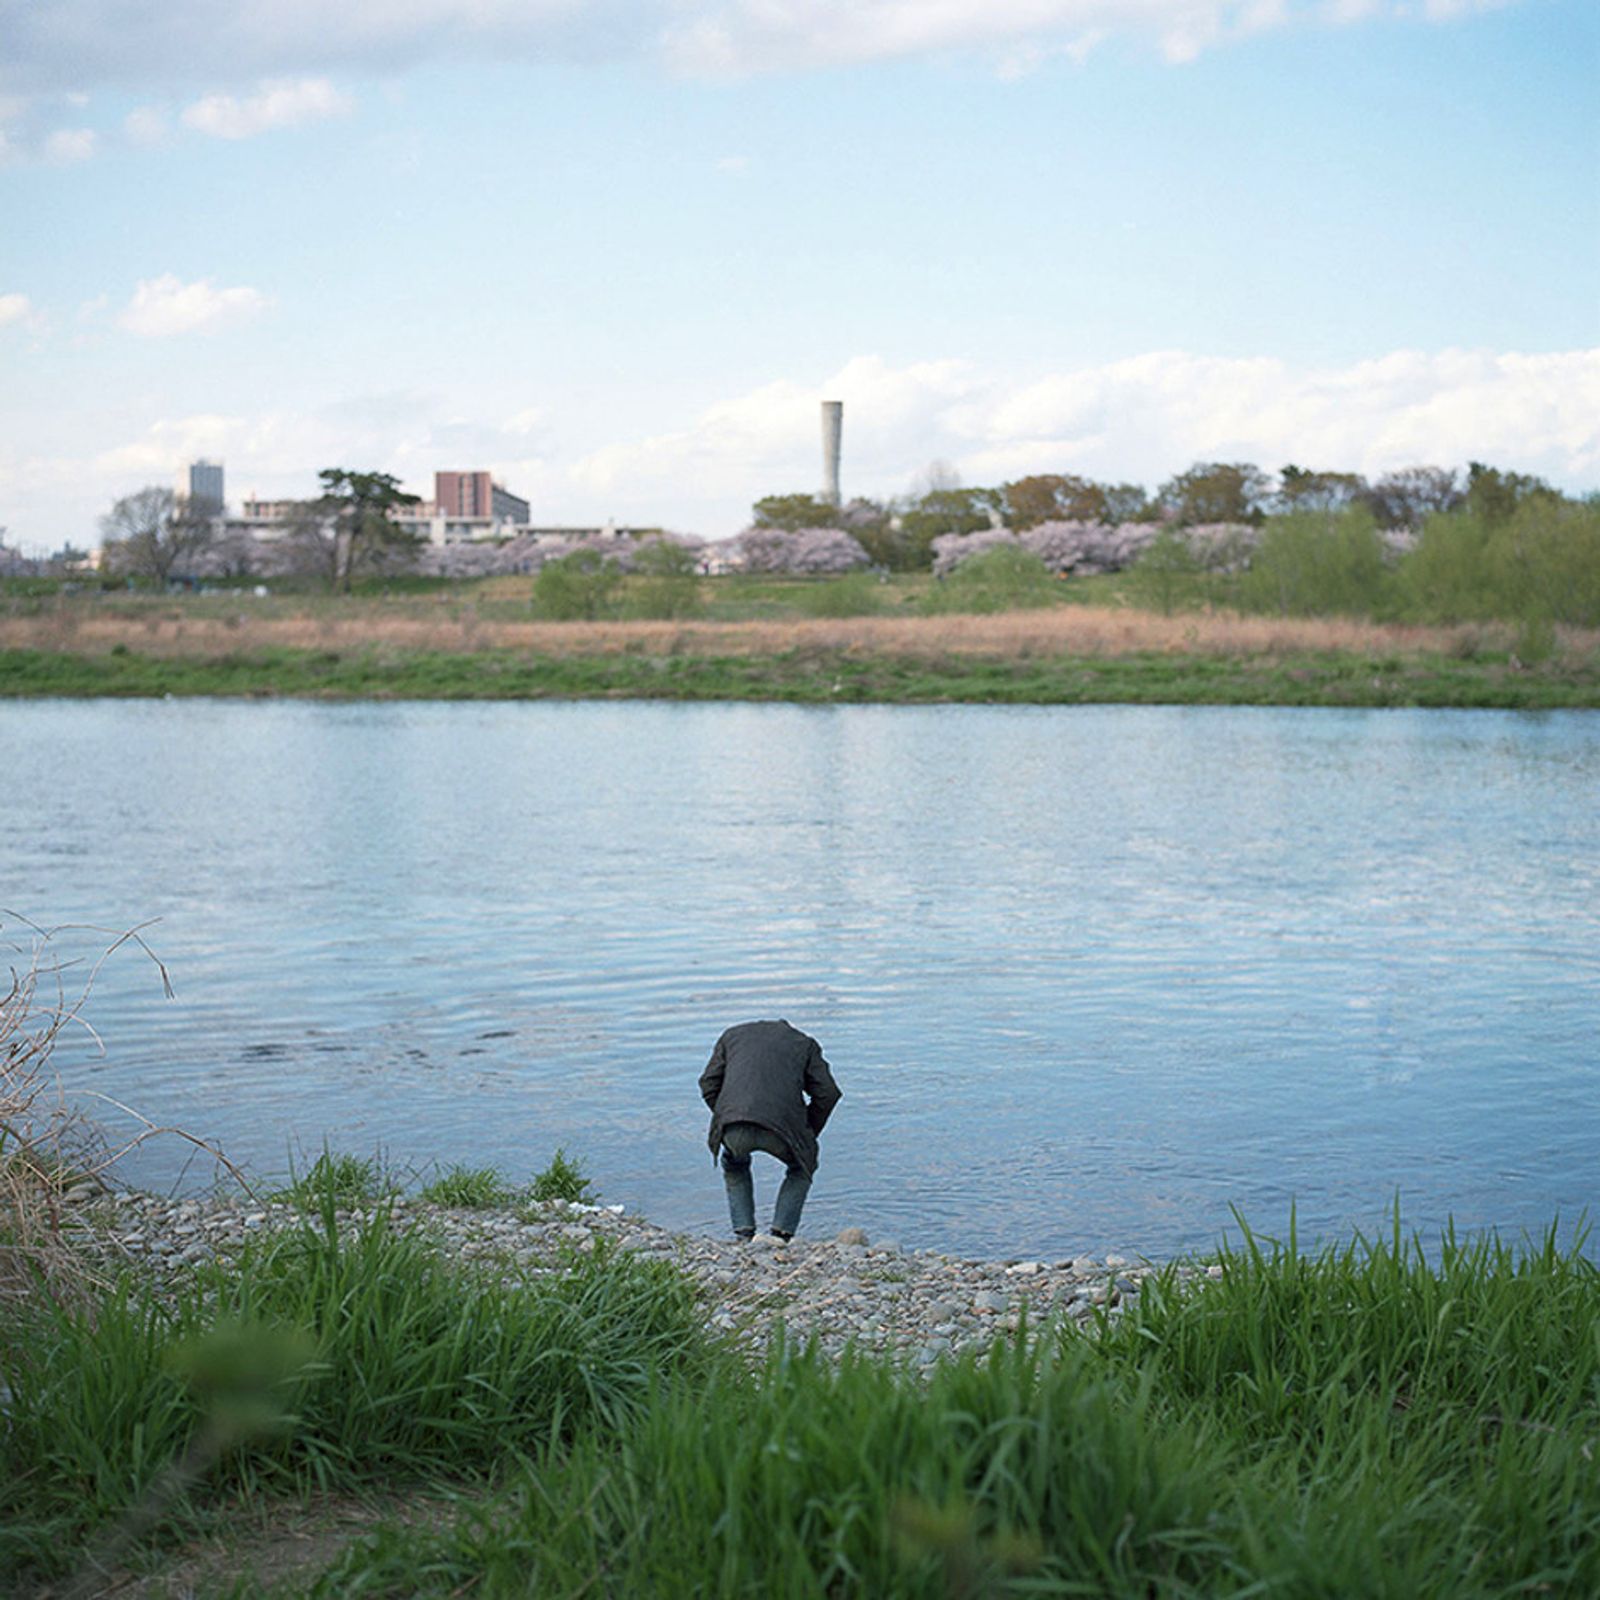 © Kentaro Takahashi - Image from the The Riverbed photography project